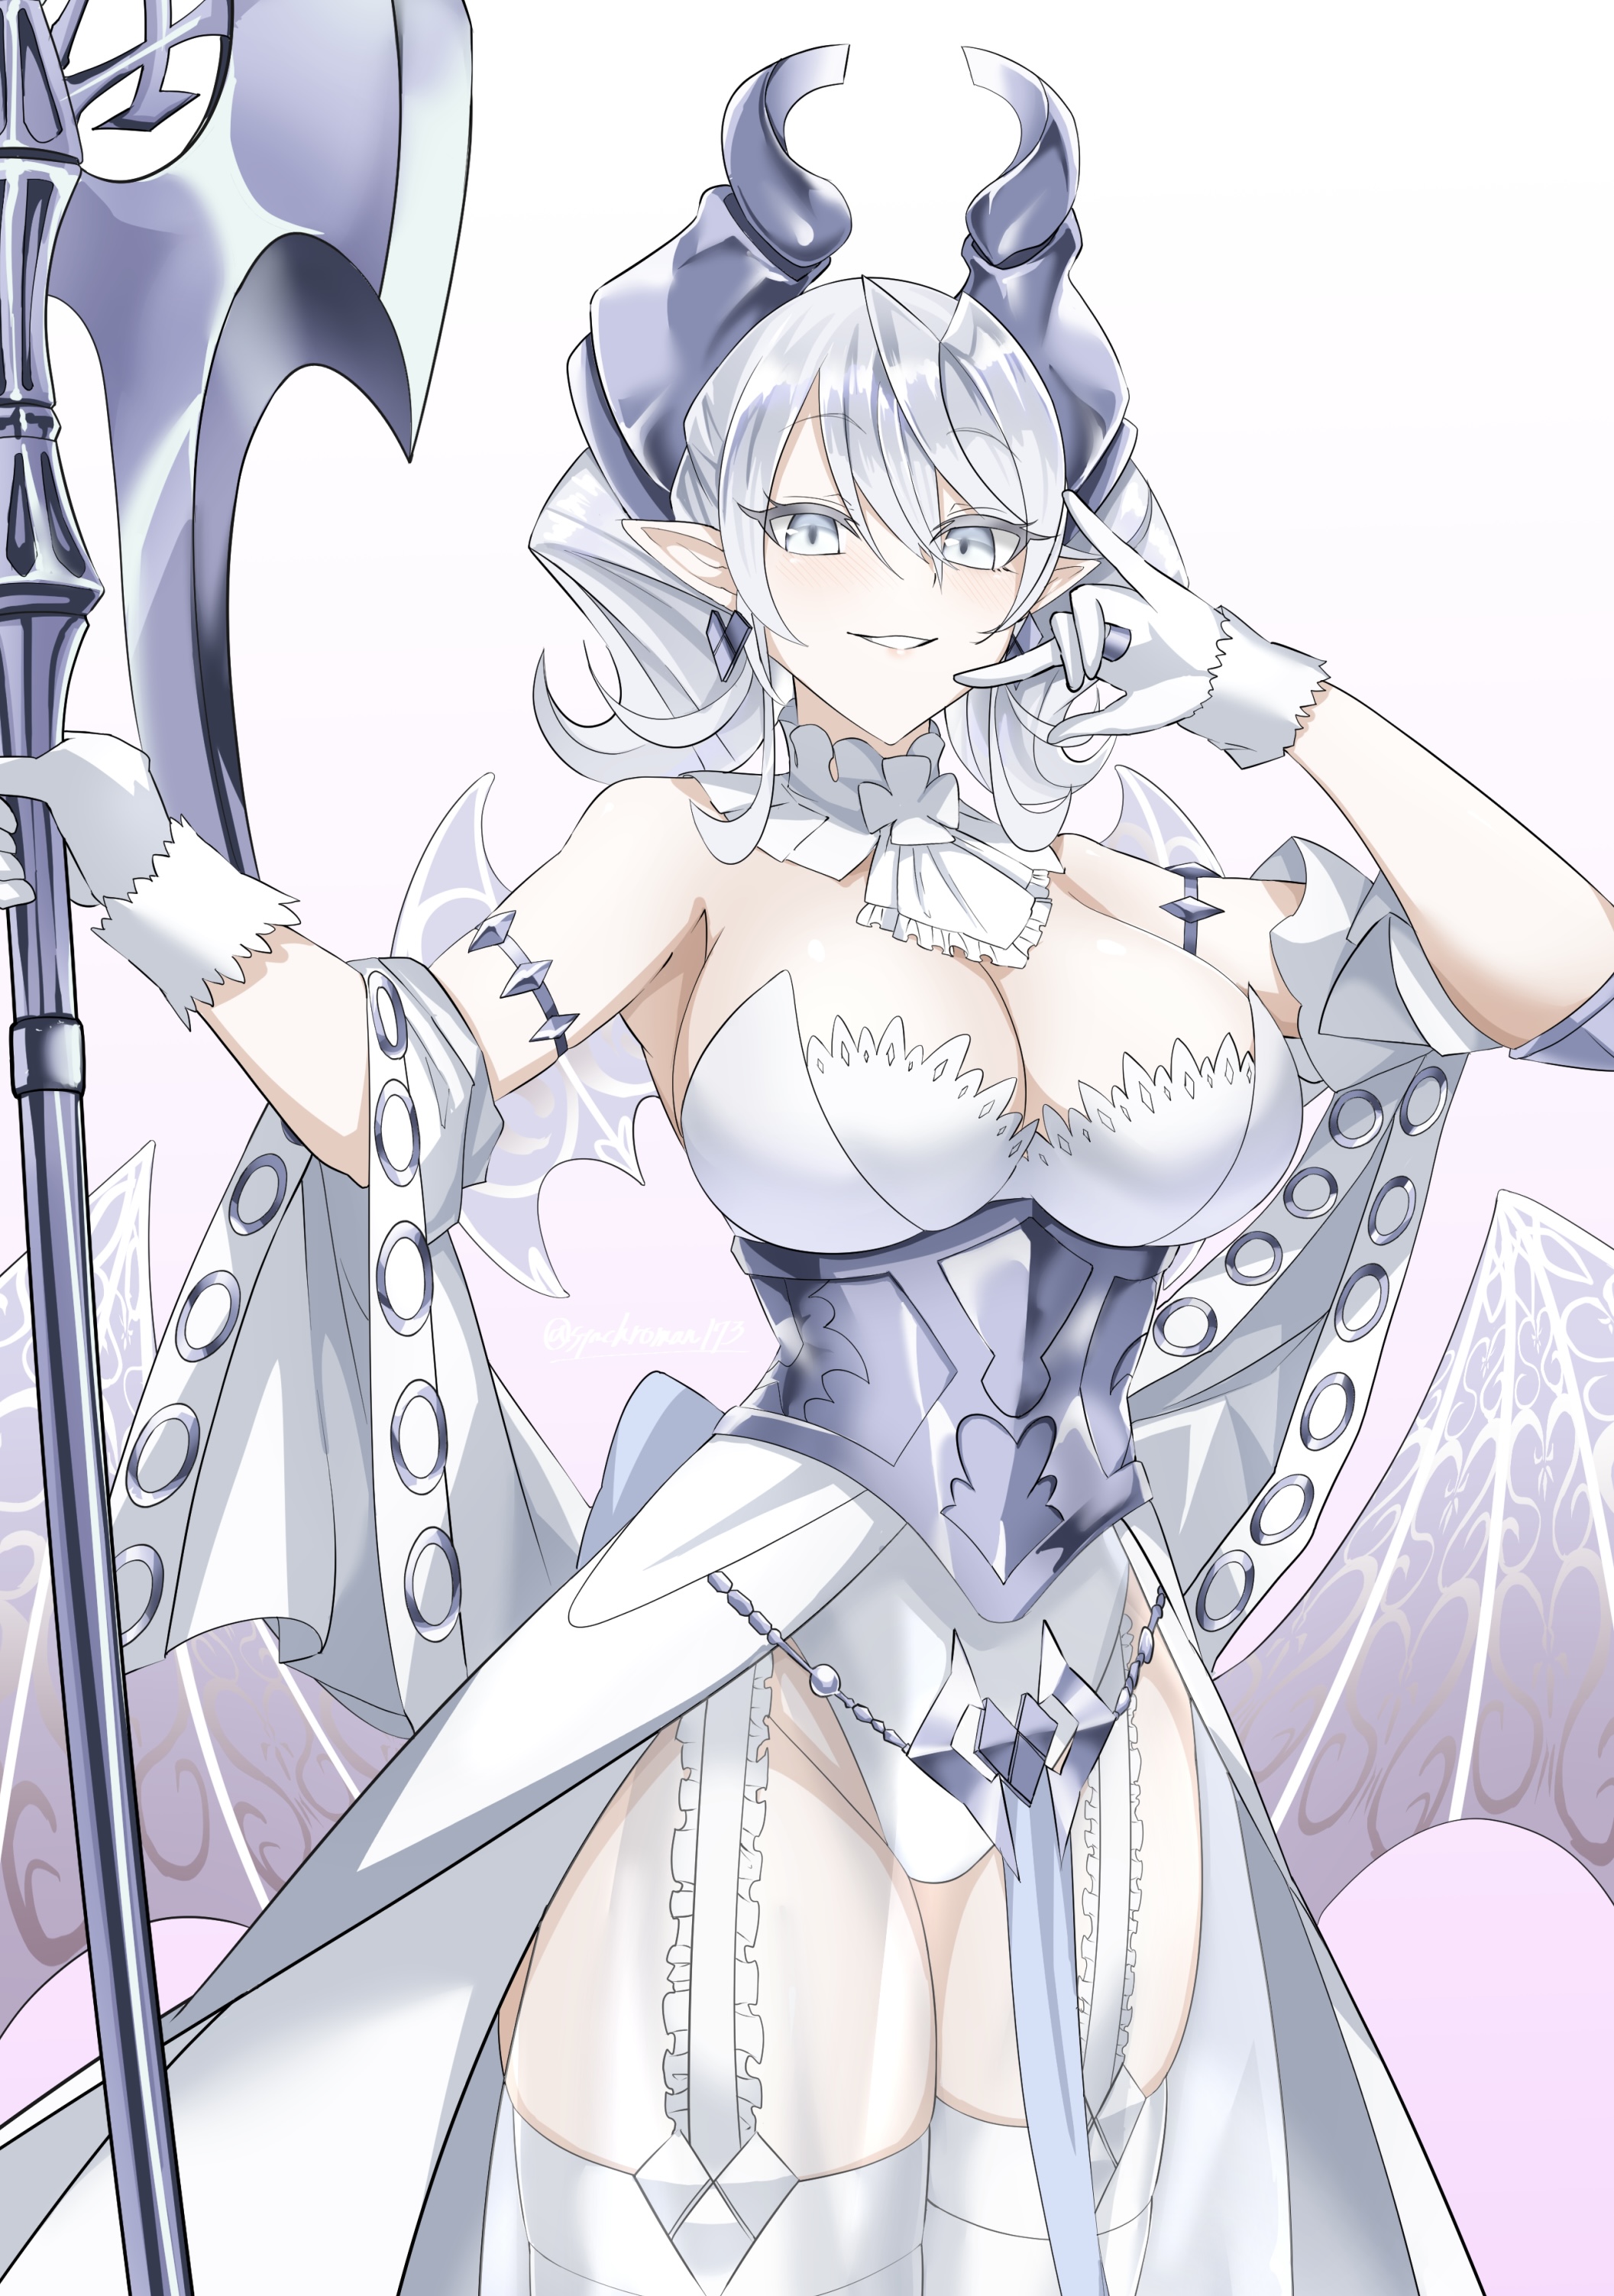 Anime 2113x3005 anime anime girls Trading Card Games Yu-Gi-Oh! Lovely Labrynth of the Silver Castle twintails white hair solo artwork digital art fan art wings big boobs